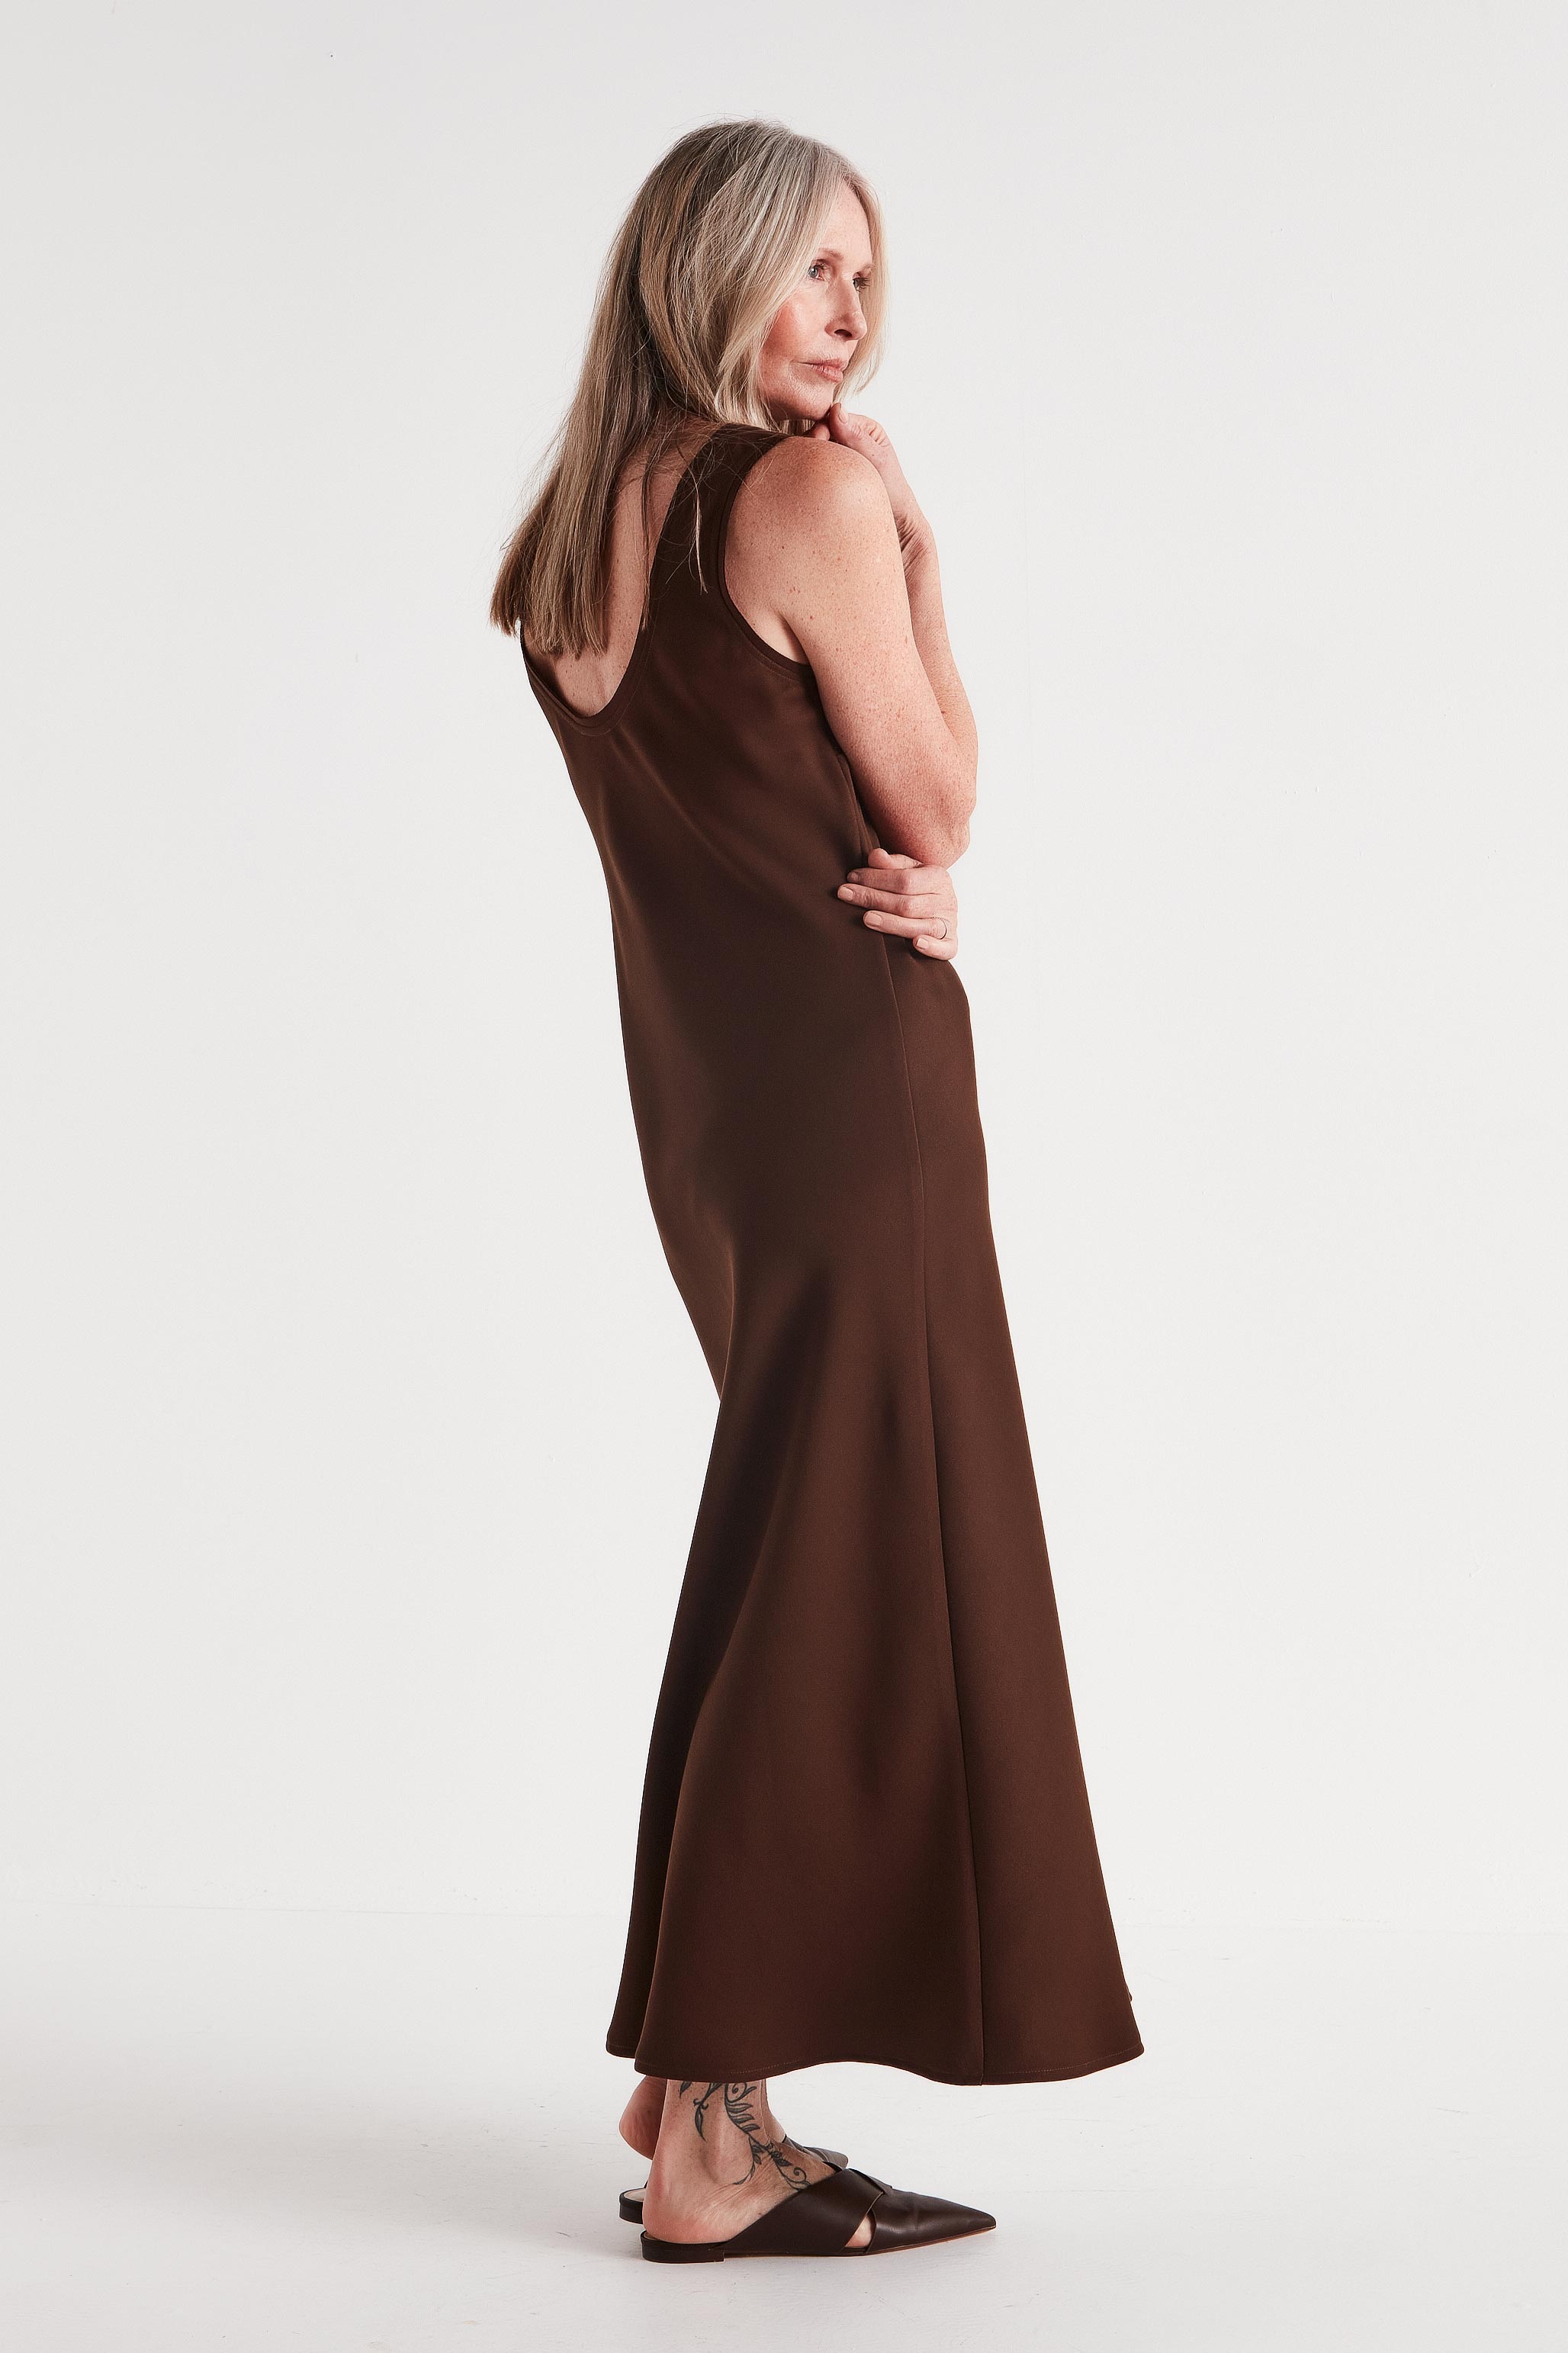 The Quinn Dress in Chocolate